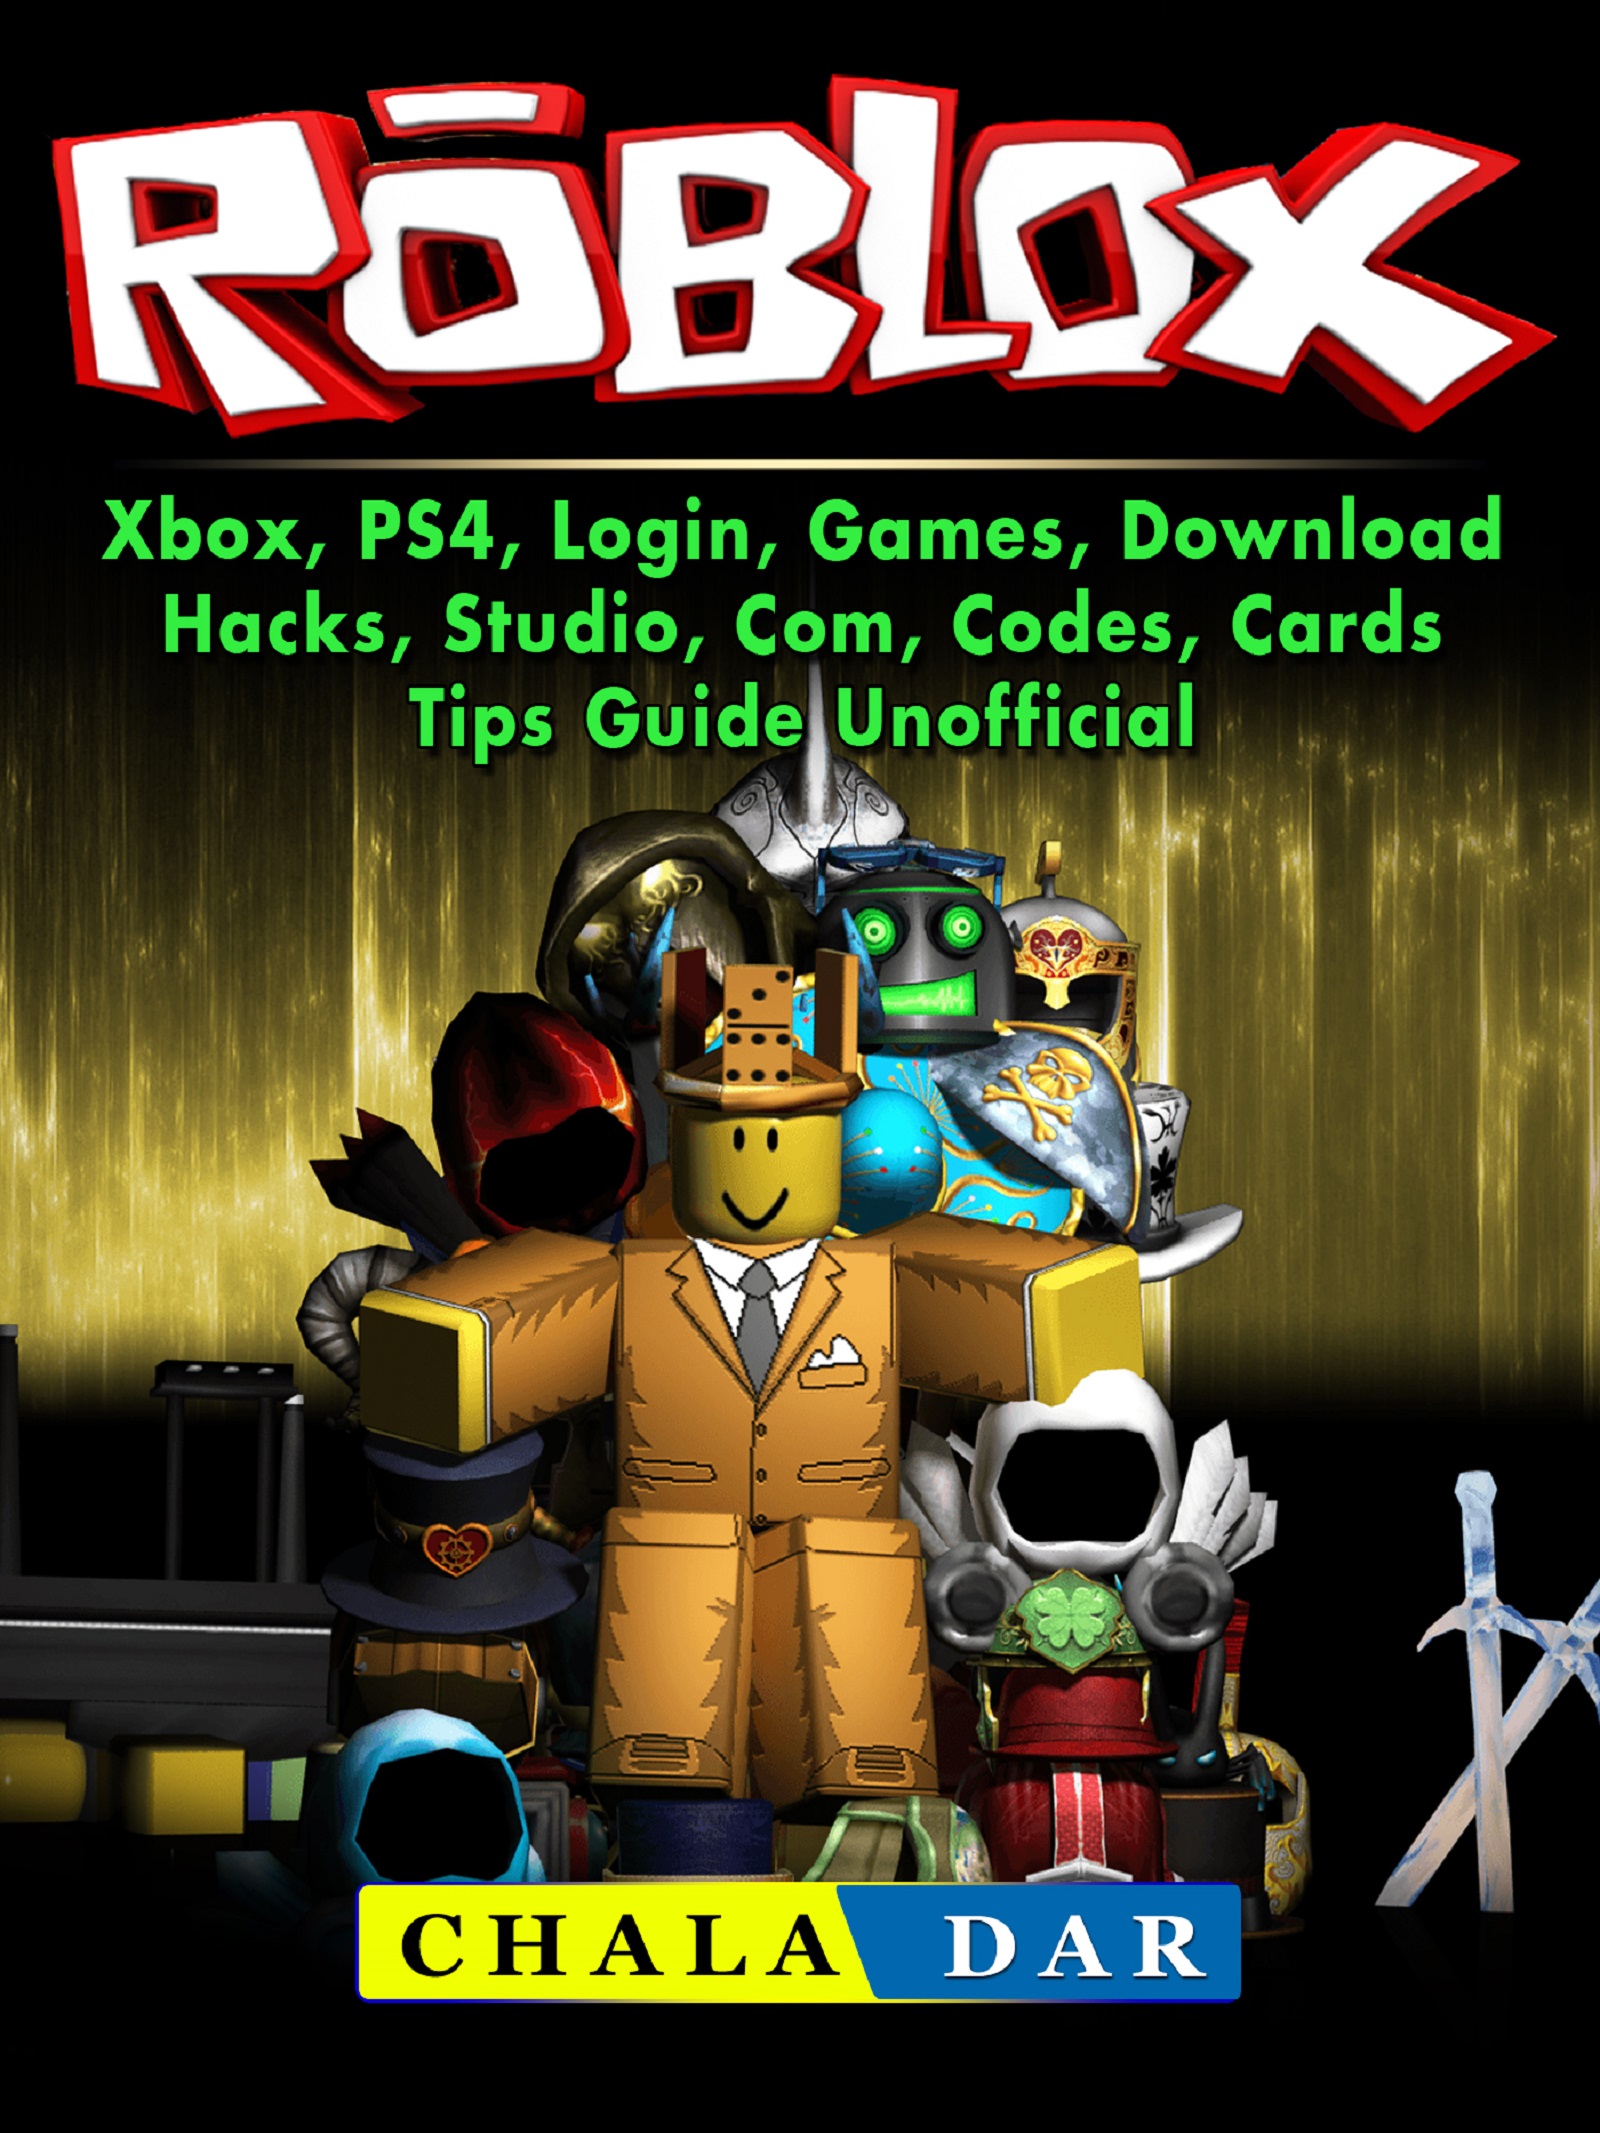 Roblox Xbox Ps4 Login Games Download Hacks Studio Com Codes Cards Tips Guide Unofficial By Chala Dar Ebooks2go Com - when was roblox released on xbox